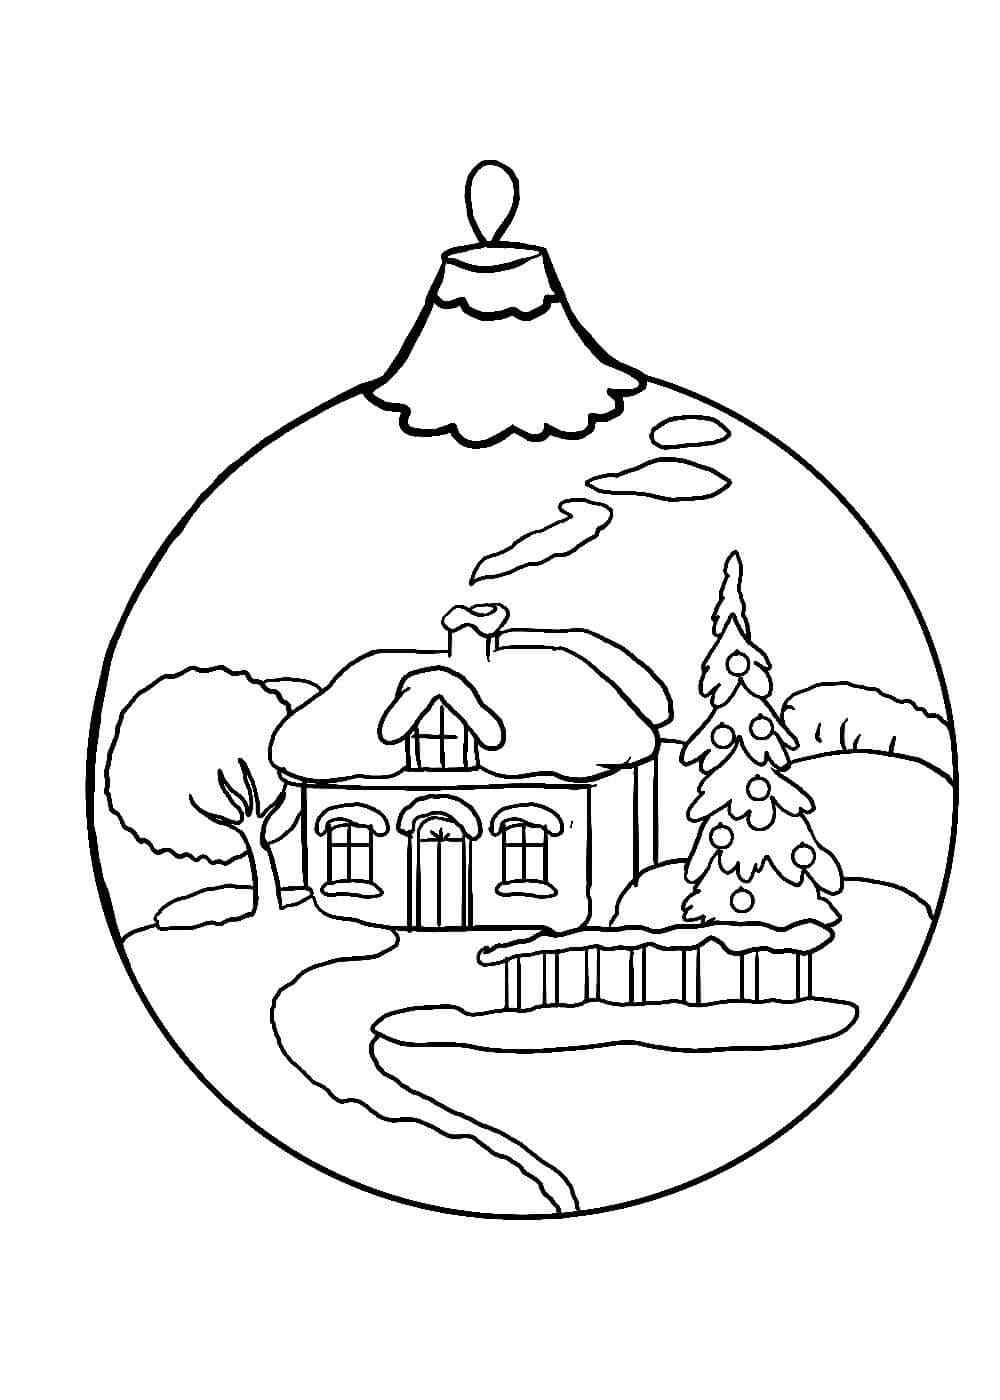 Image Of A Snowy Forest On A Christmas Ball